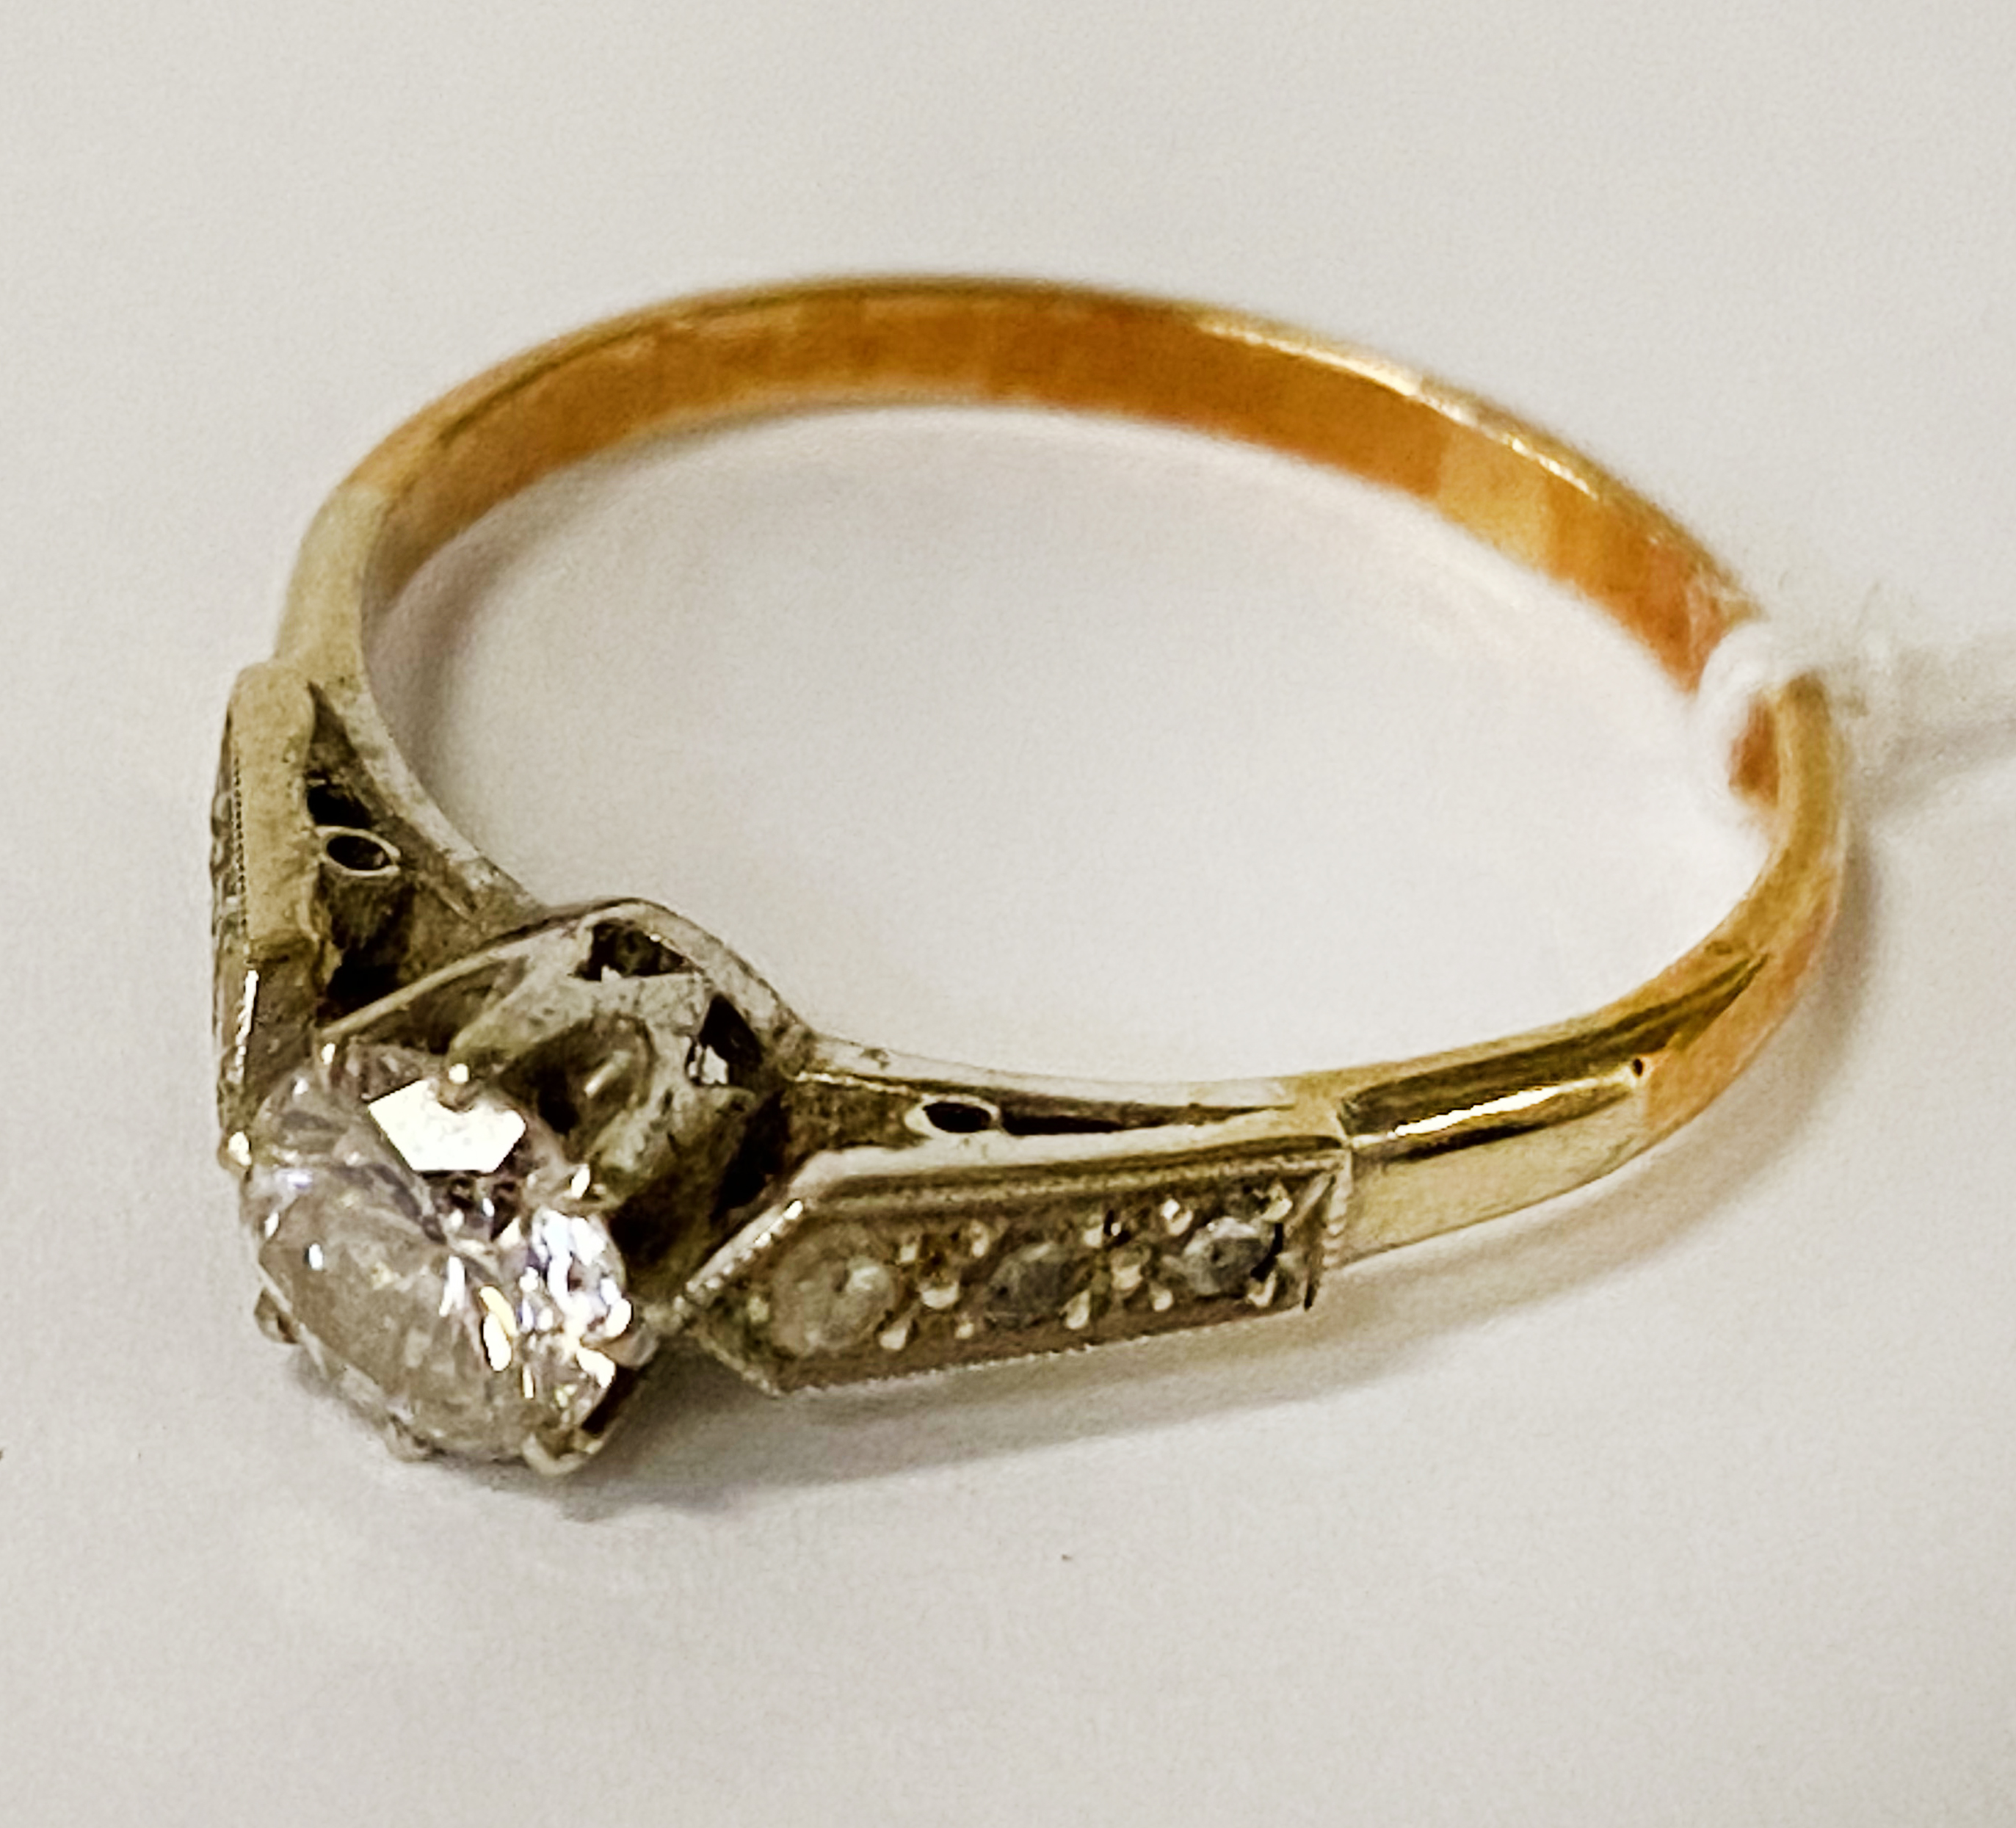 YELLOW GOLD DIAMOND RING CENTRE STONE IS APPROX 0.40CTS WITH 6 SMALL DIAMONDS TO THE SIDE SIZE P/Q